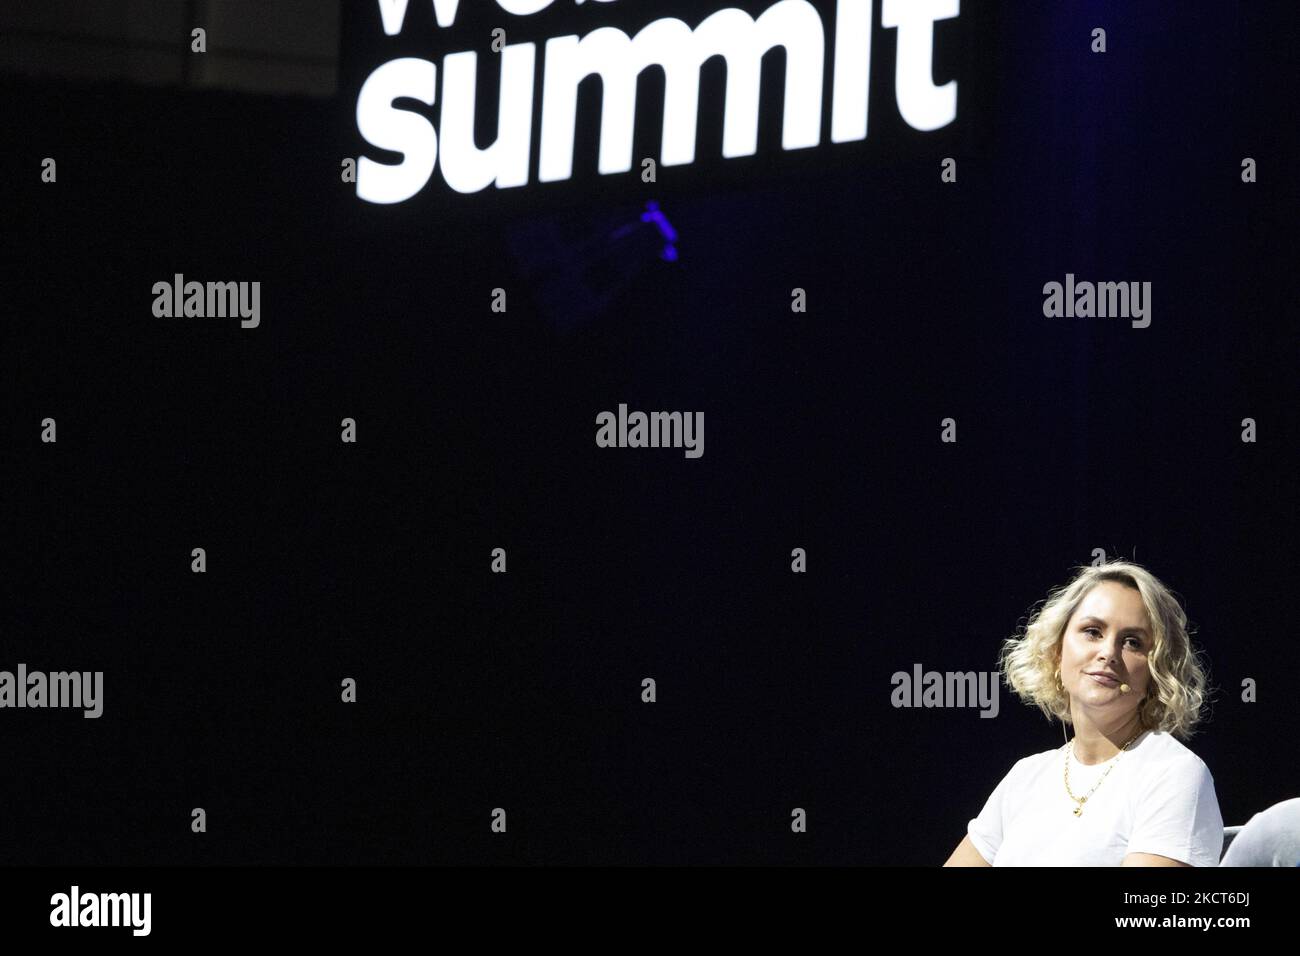 Director of influencer at Condé Nast Anna Anderson, CEO of NYCE Philip Michael, George Slefo speaks during third day of Web Summit 2021 in Lisbon, Portugal on November 3, 2021. (Photo by Rita Franca/NurPhoto) Stock Photo